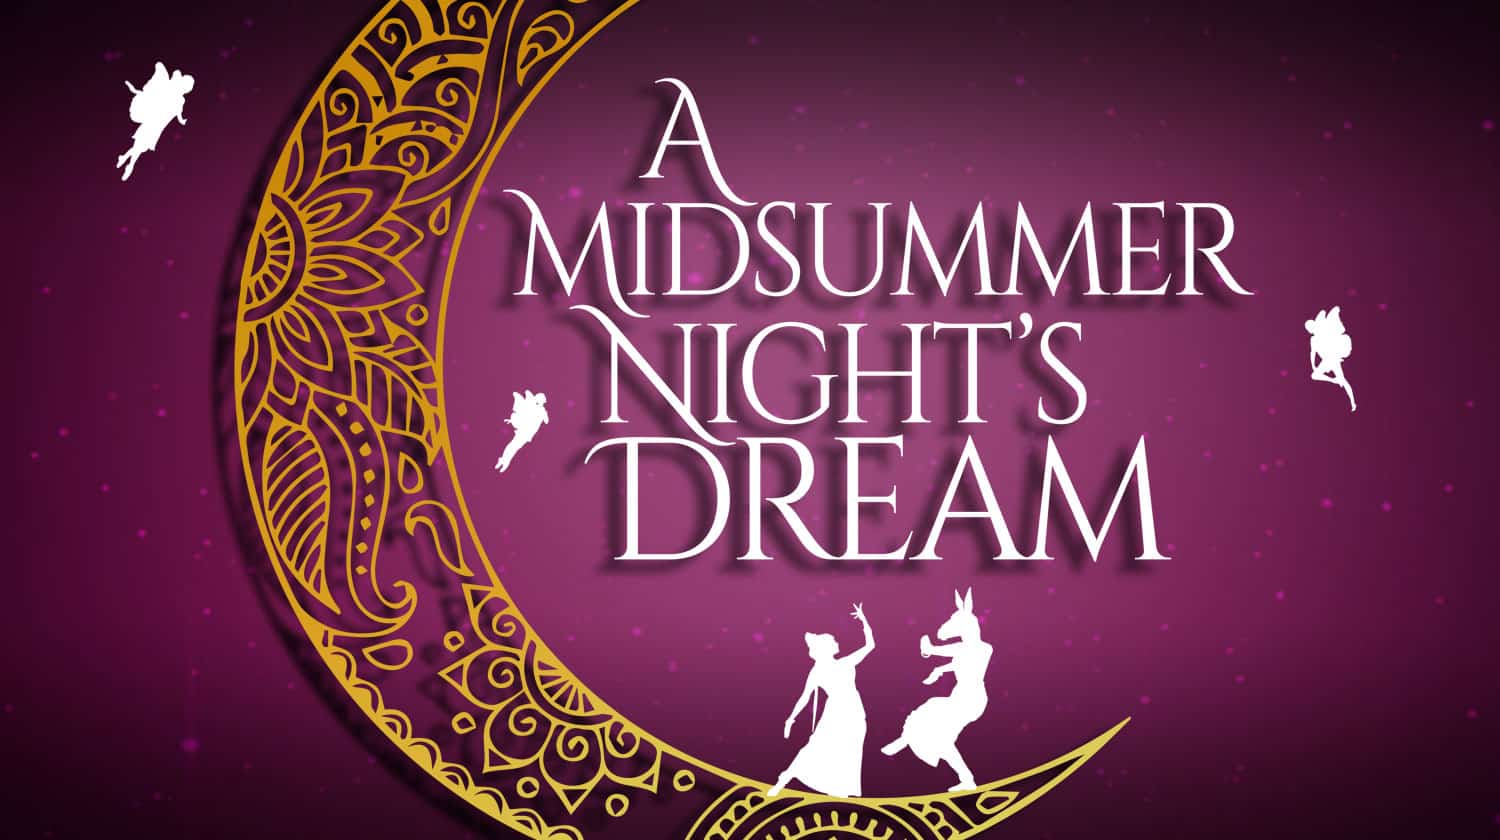 Introduction to A Midsummer Night's Dream